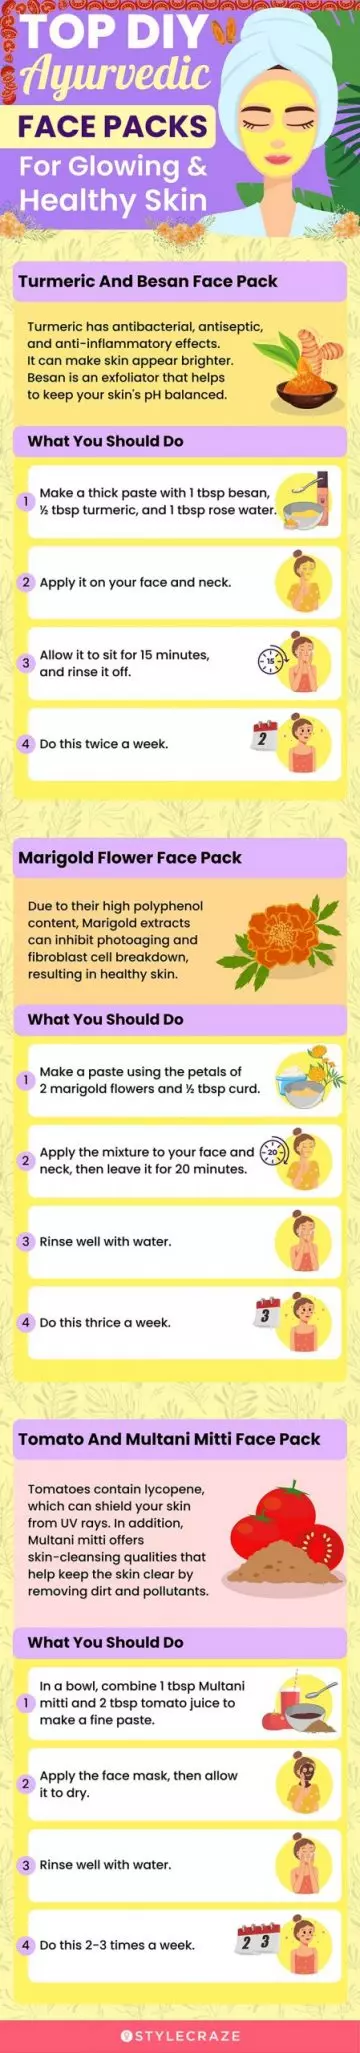 top diy ayurvedic face packs for glowing & healthy skin (infographic)